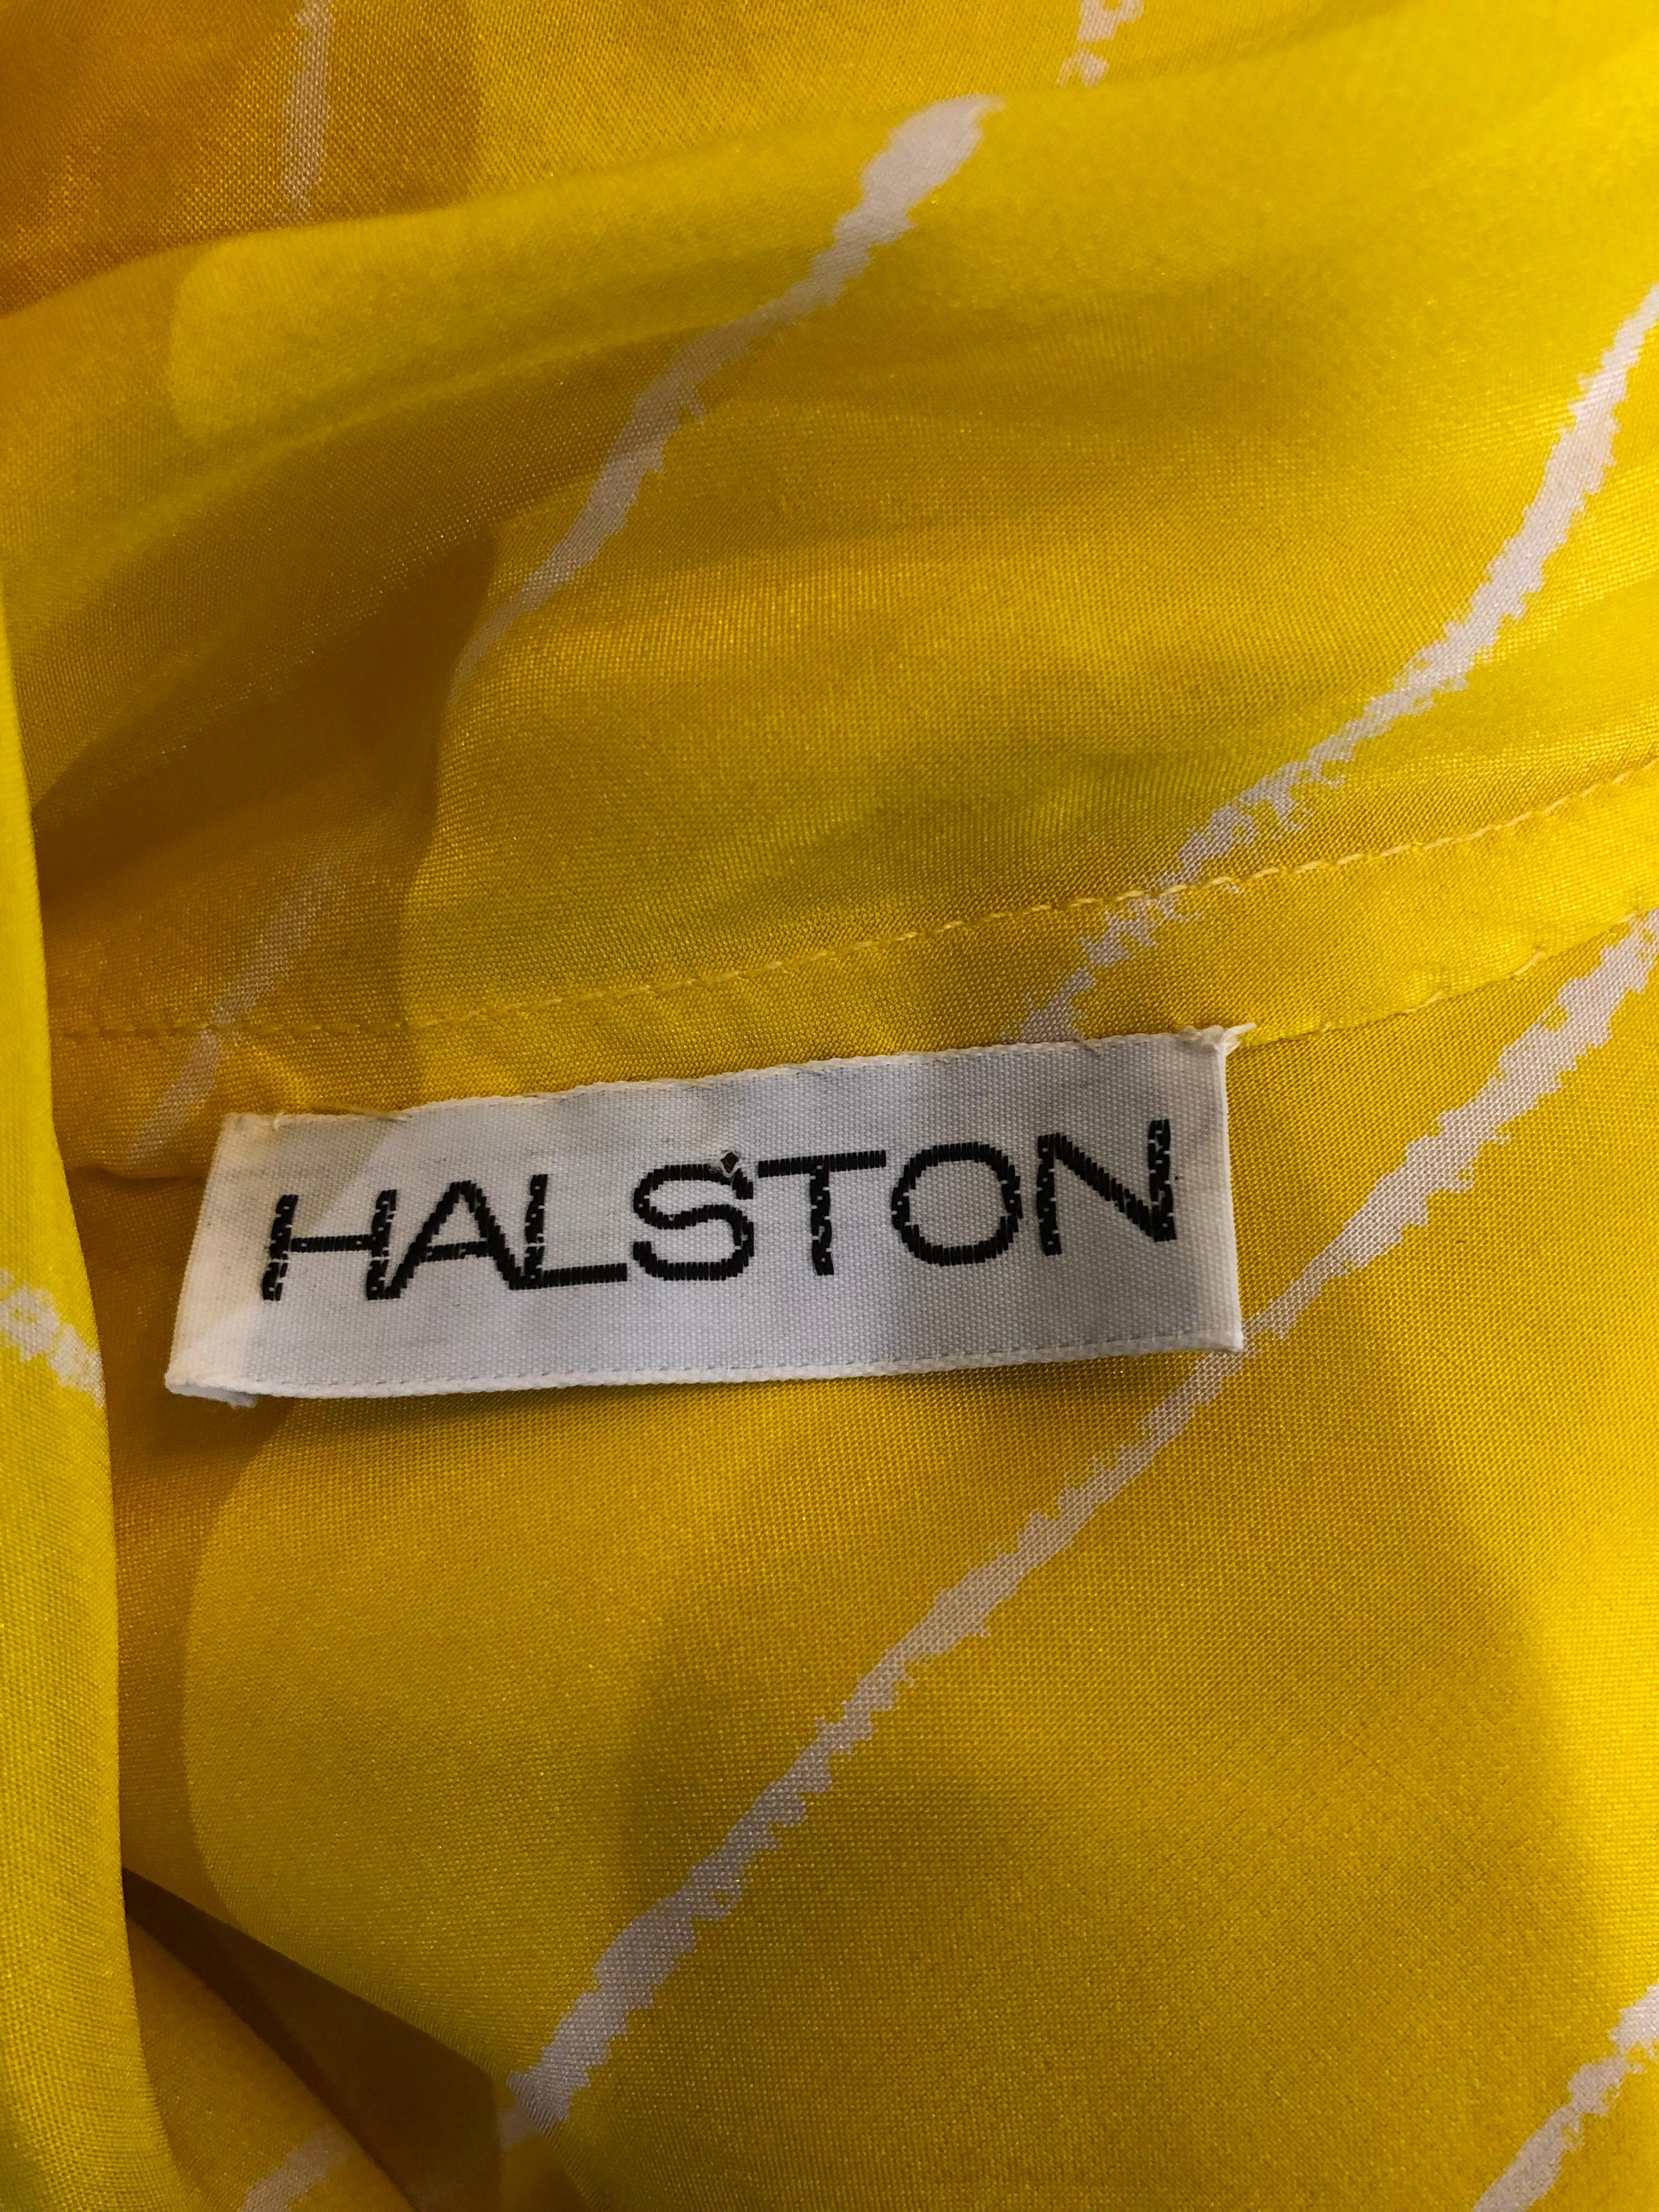 Amazing vintage 1970s HALSTON canary yellow and white chevon striped silk scarf dress! Features a beautiful yellow color with flattering thin white chevron stripes throughout. Attached long silk scarf can be worn a number of ways. Elastic waistband